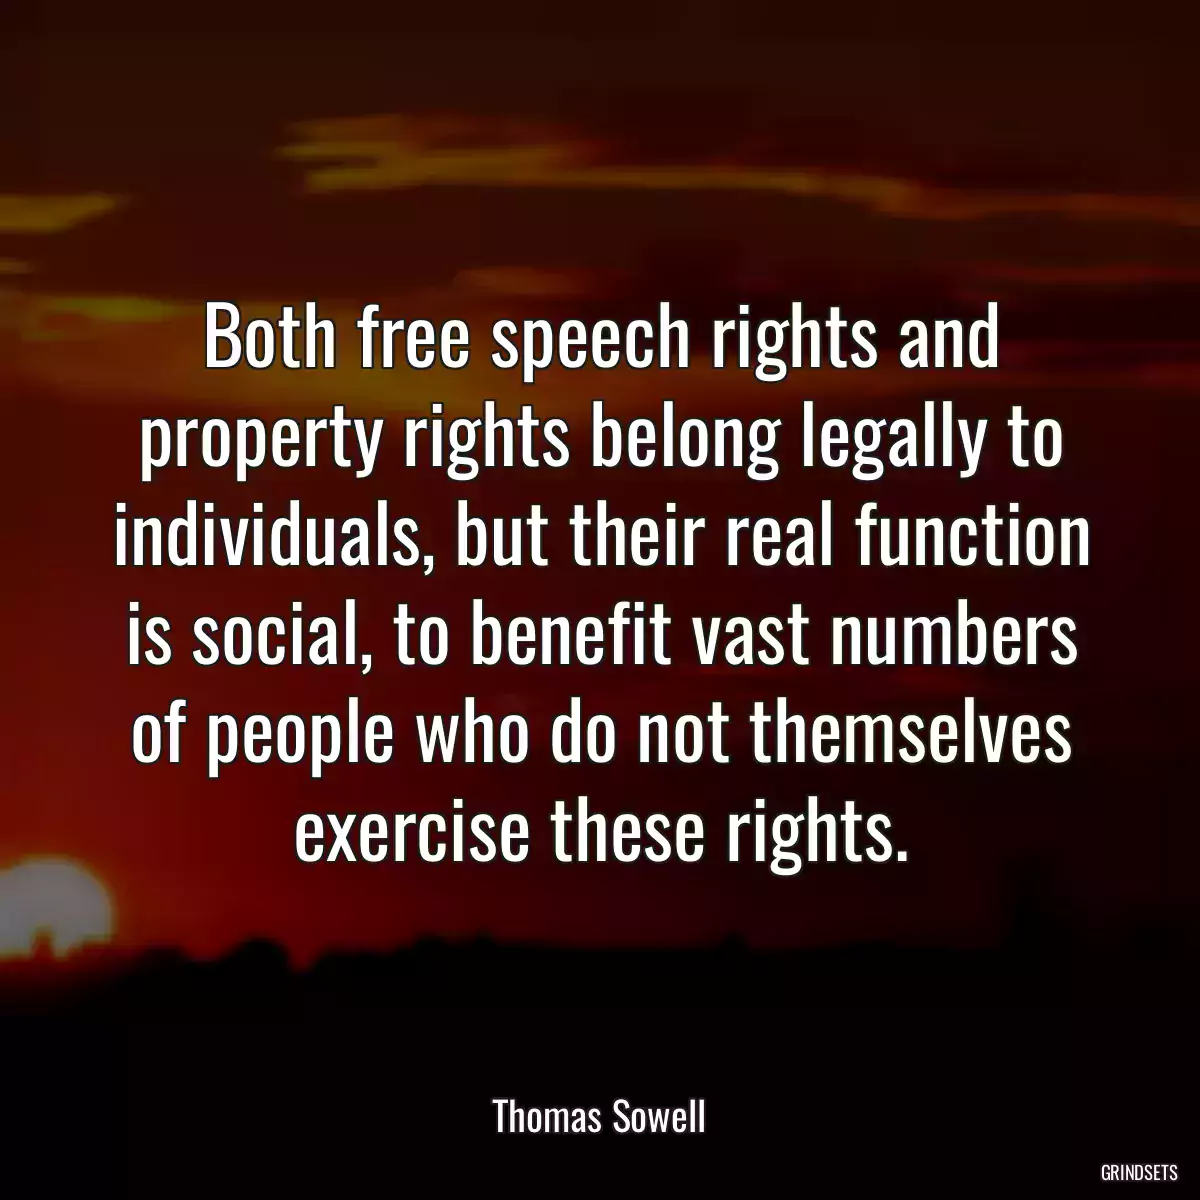 Both free speech rights and property rights belong legally to individuals, but their real function is social, to benefit vast numbers of people who do not themselves exercise these rights.